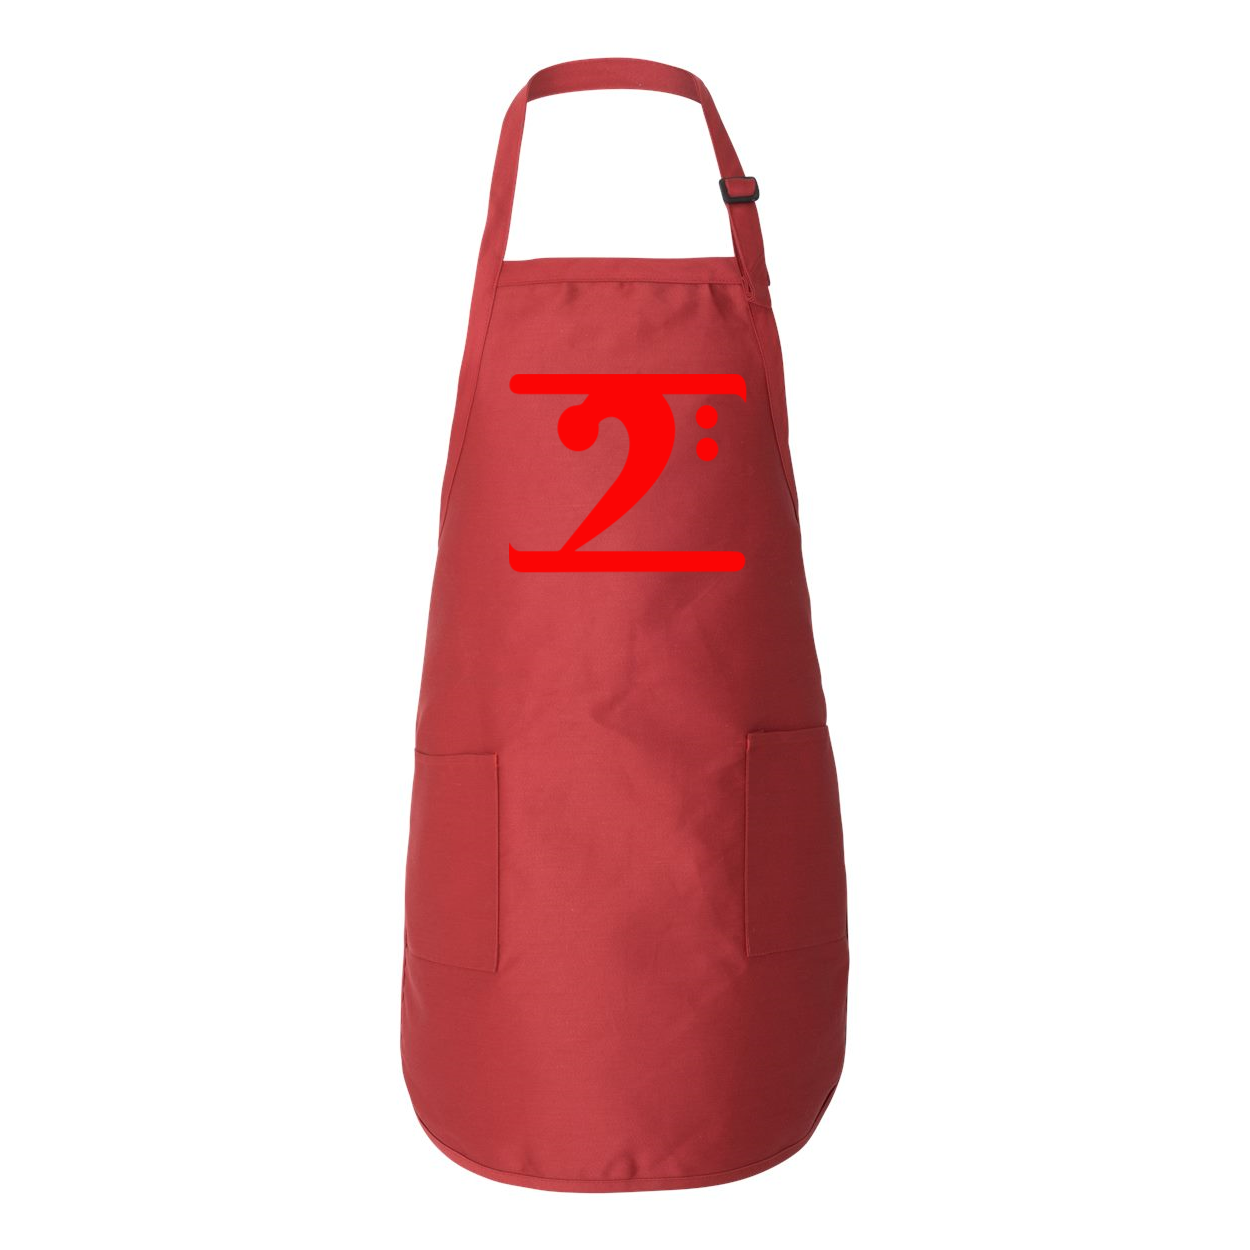 RED LOGO Full-Length Apron with Pockets - Lathon Bass Wear